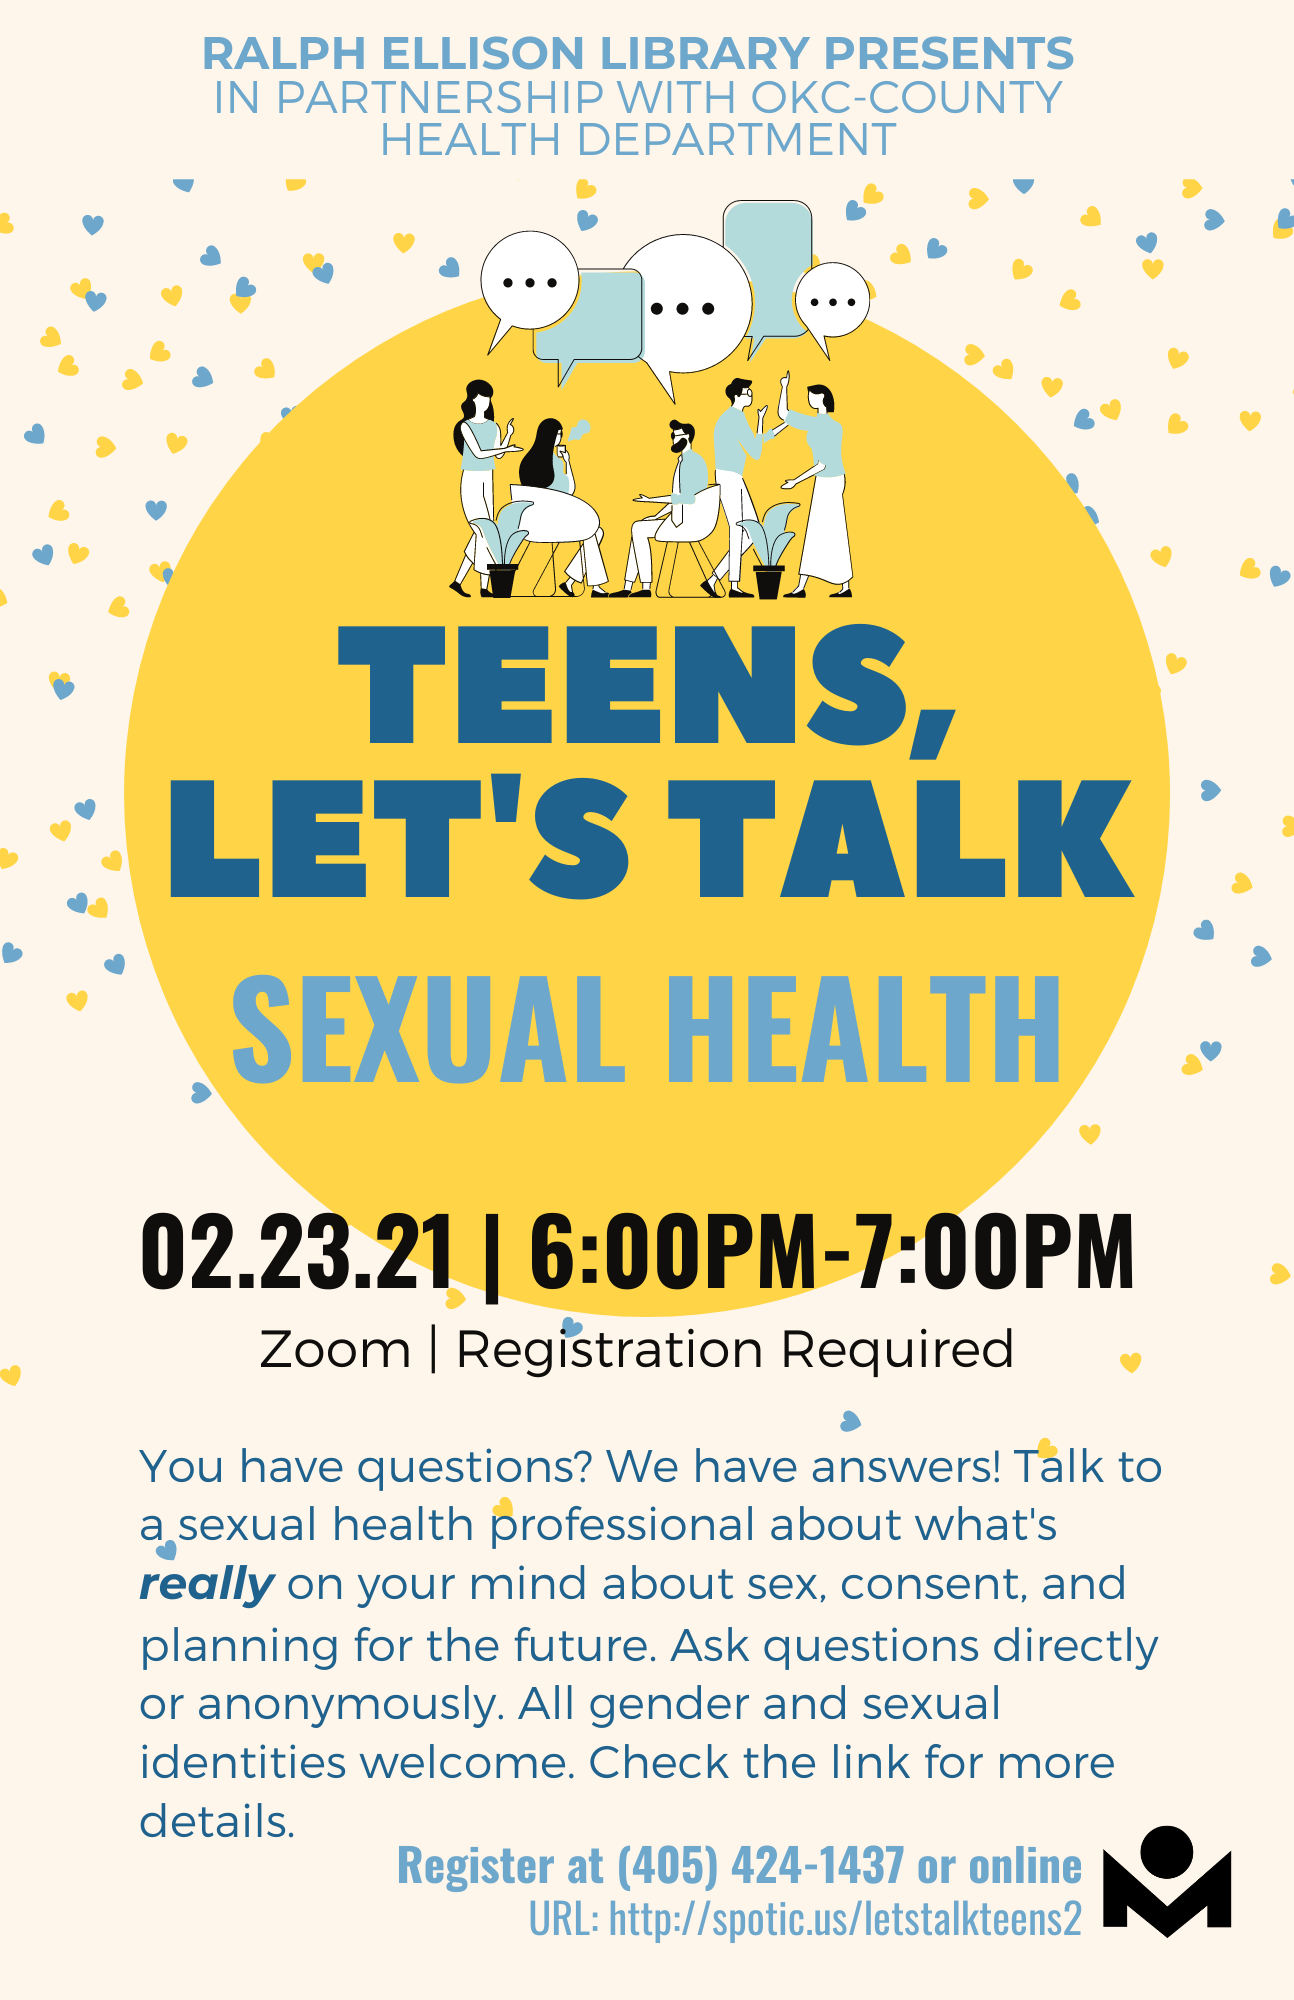 This is a promotional image for the Teens, Let's Talk Sexual Health program.